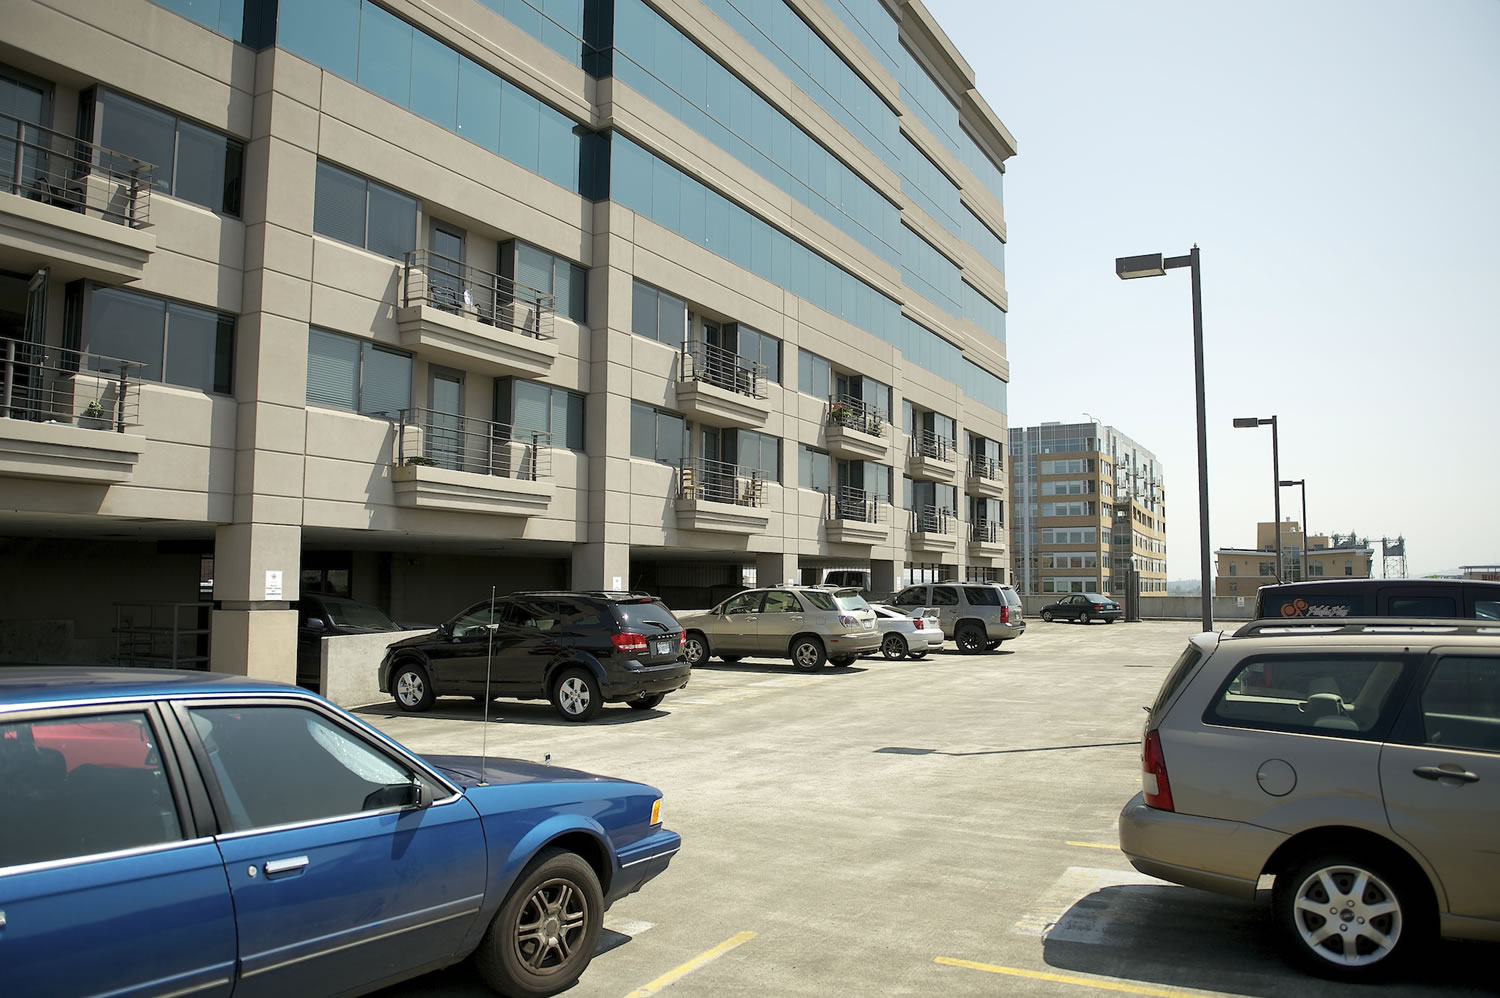 The Riverview Tower Garage on Tuesday sports mostly vacant parking spots leased by the city.